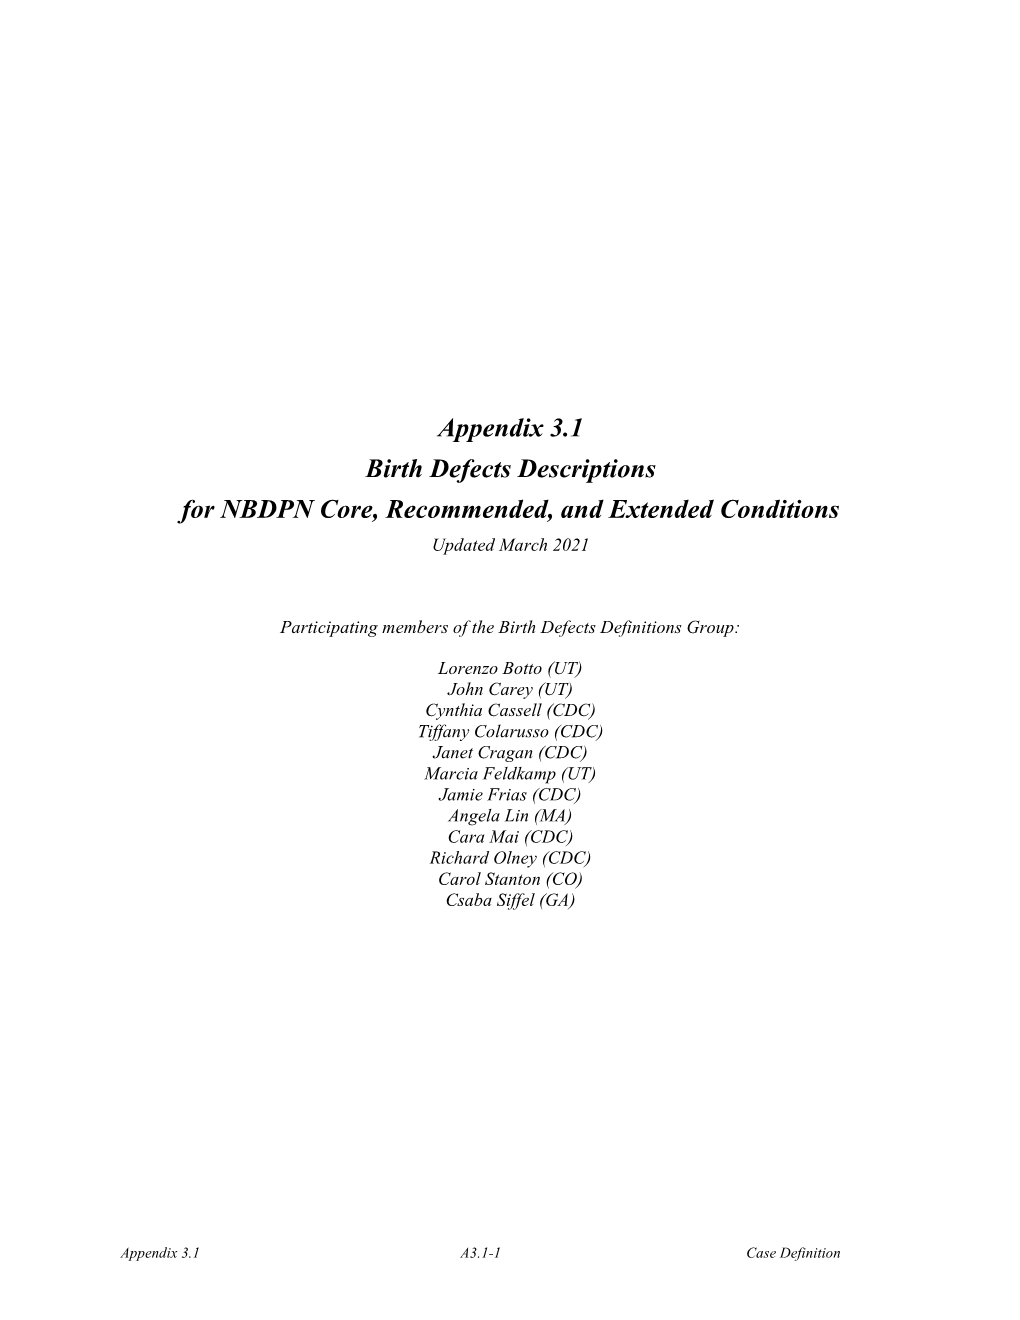 Appendix 3.1 Birth Defects Descriptions for NBDPN Core, Recommended, and Extended Conditions Updated March 2021